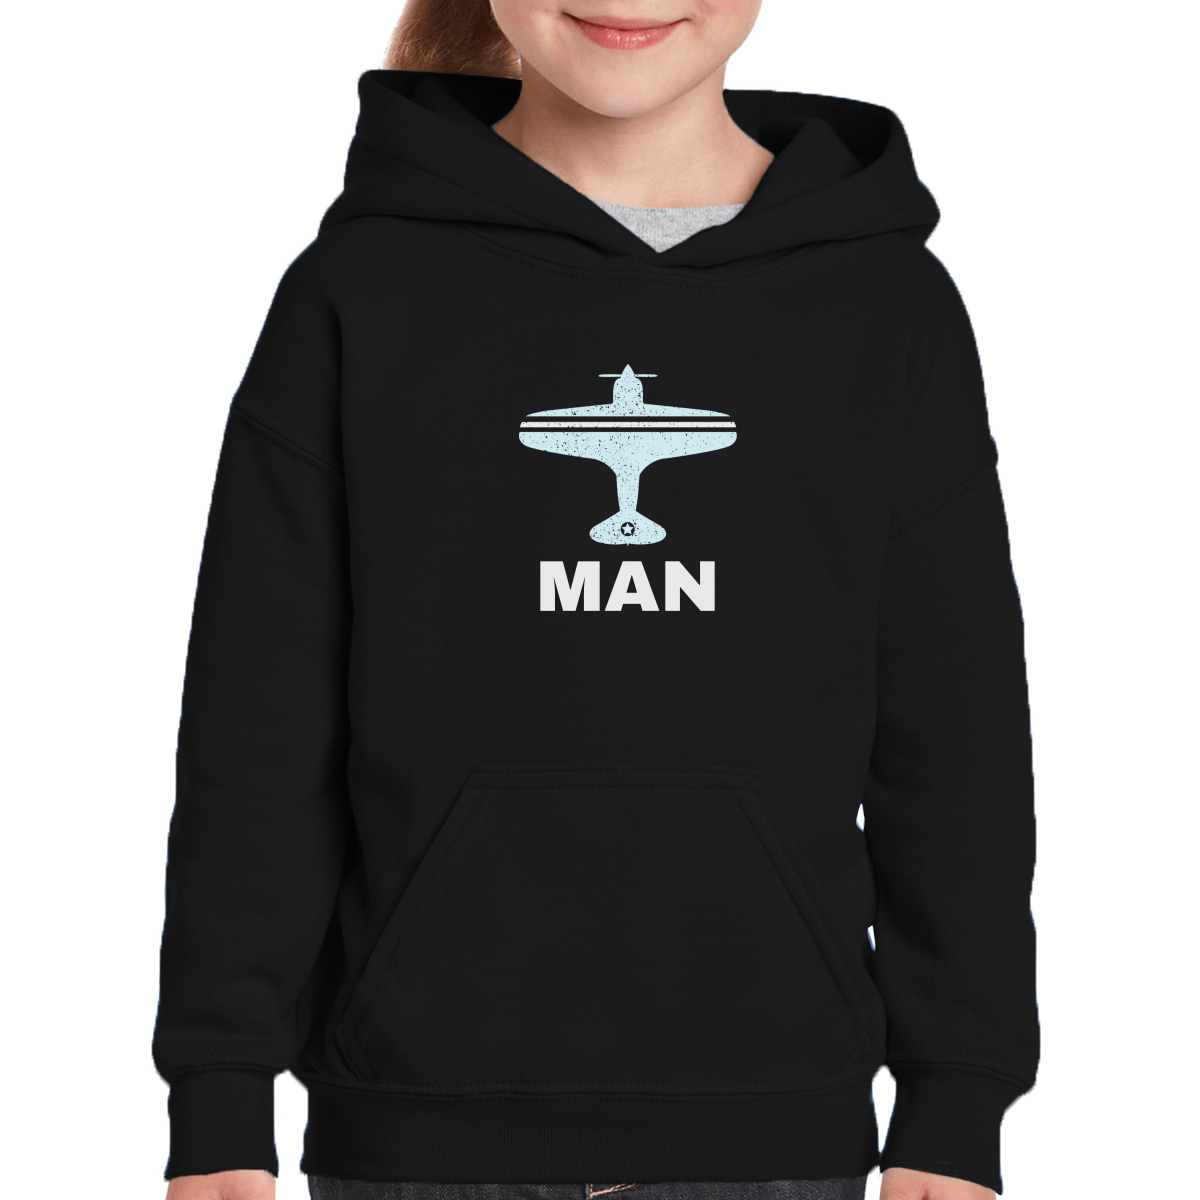 Fly Manchester MAN Airport Kids Hoodie | Black